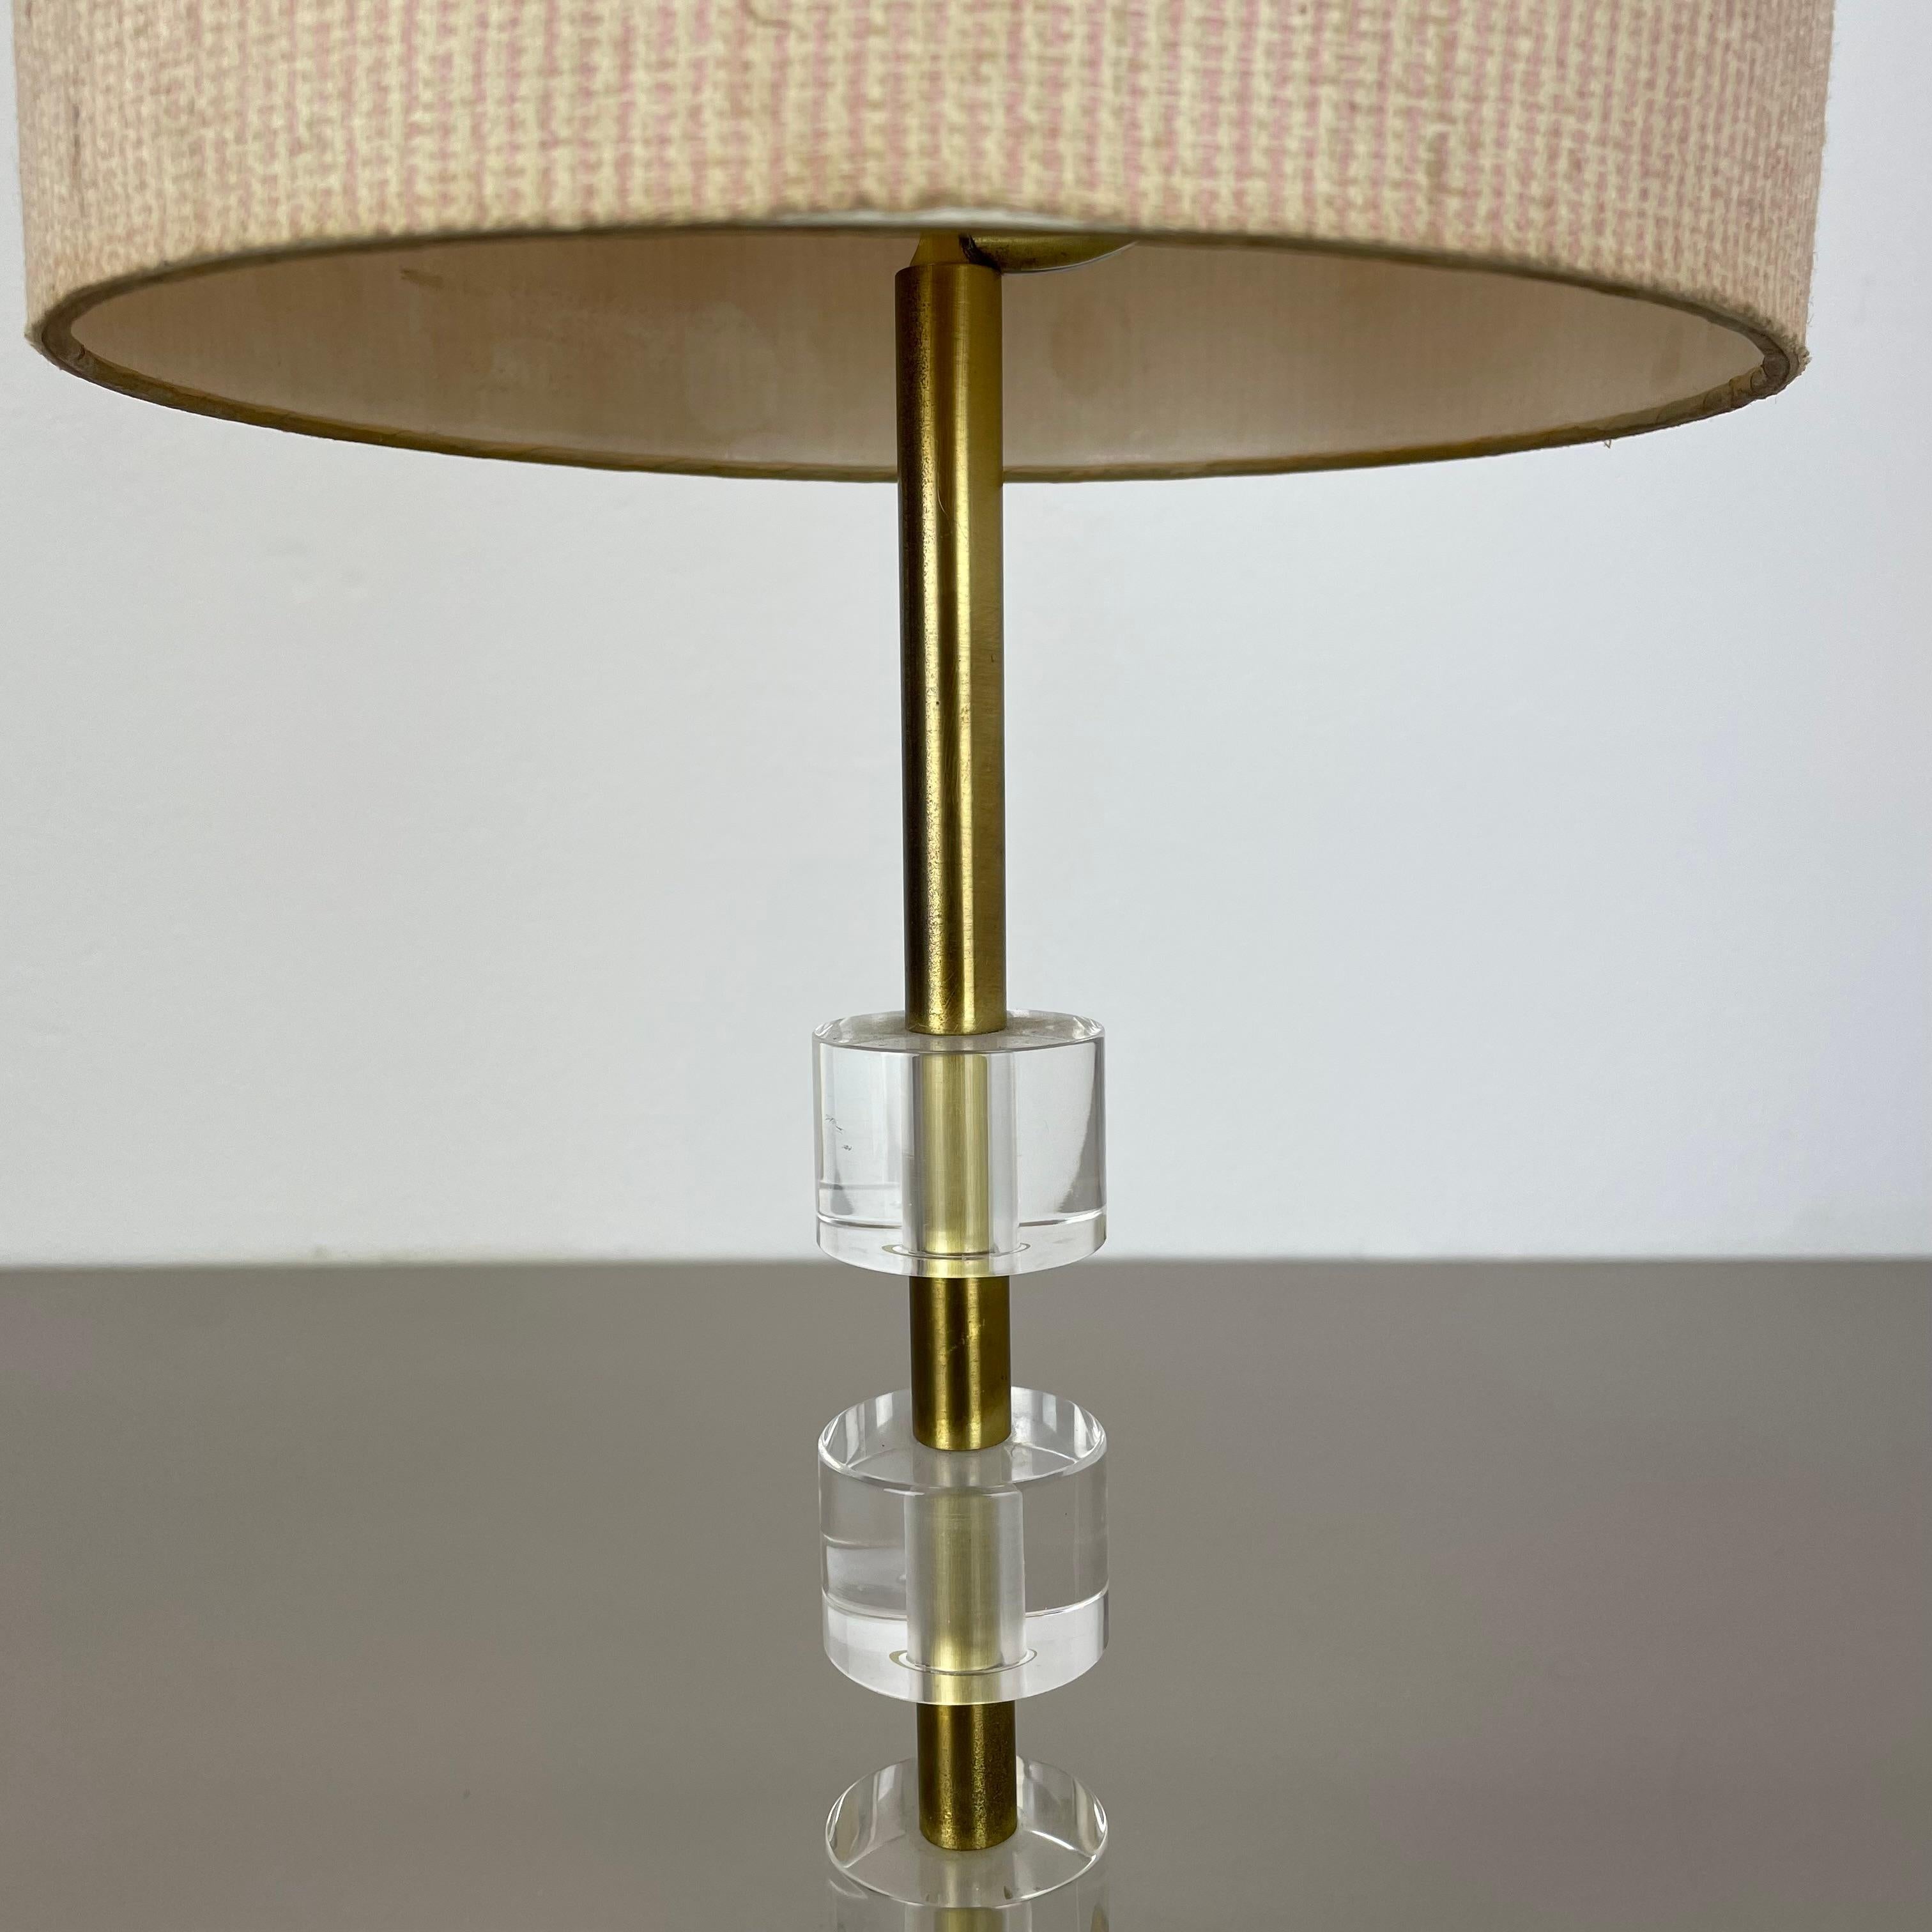 Postmodern Brass and Acryl Glass Cubic Stilnovo Style Table Light, Italy 1970s For Sale 7